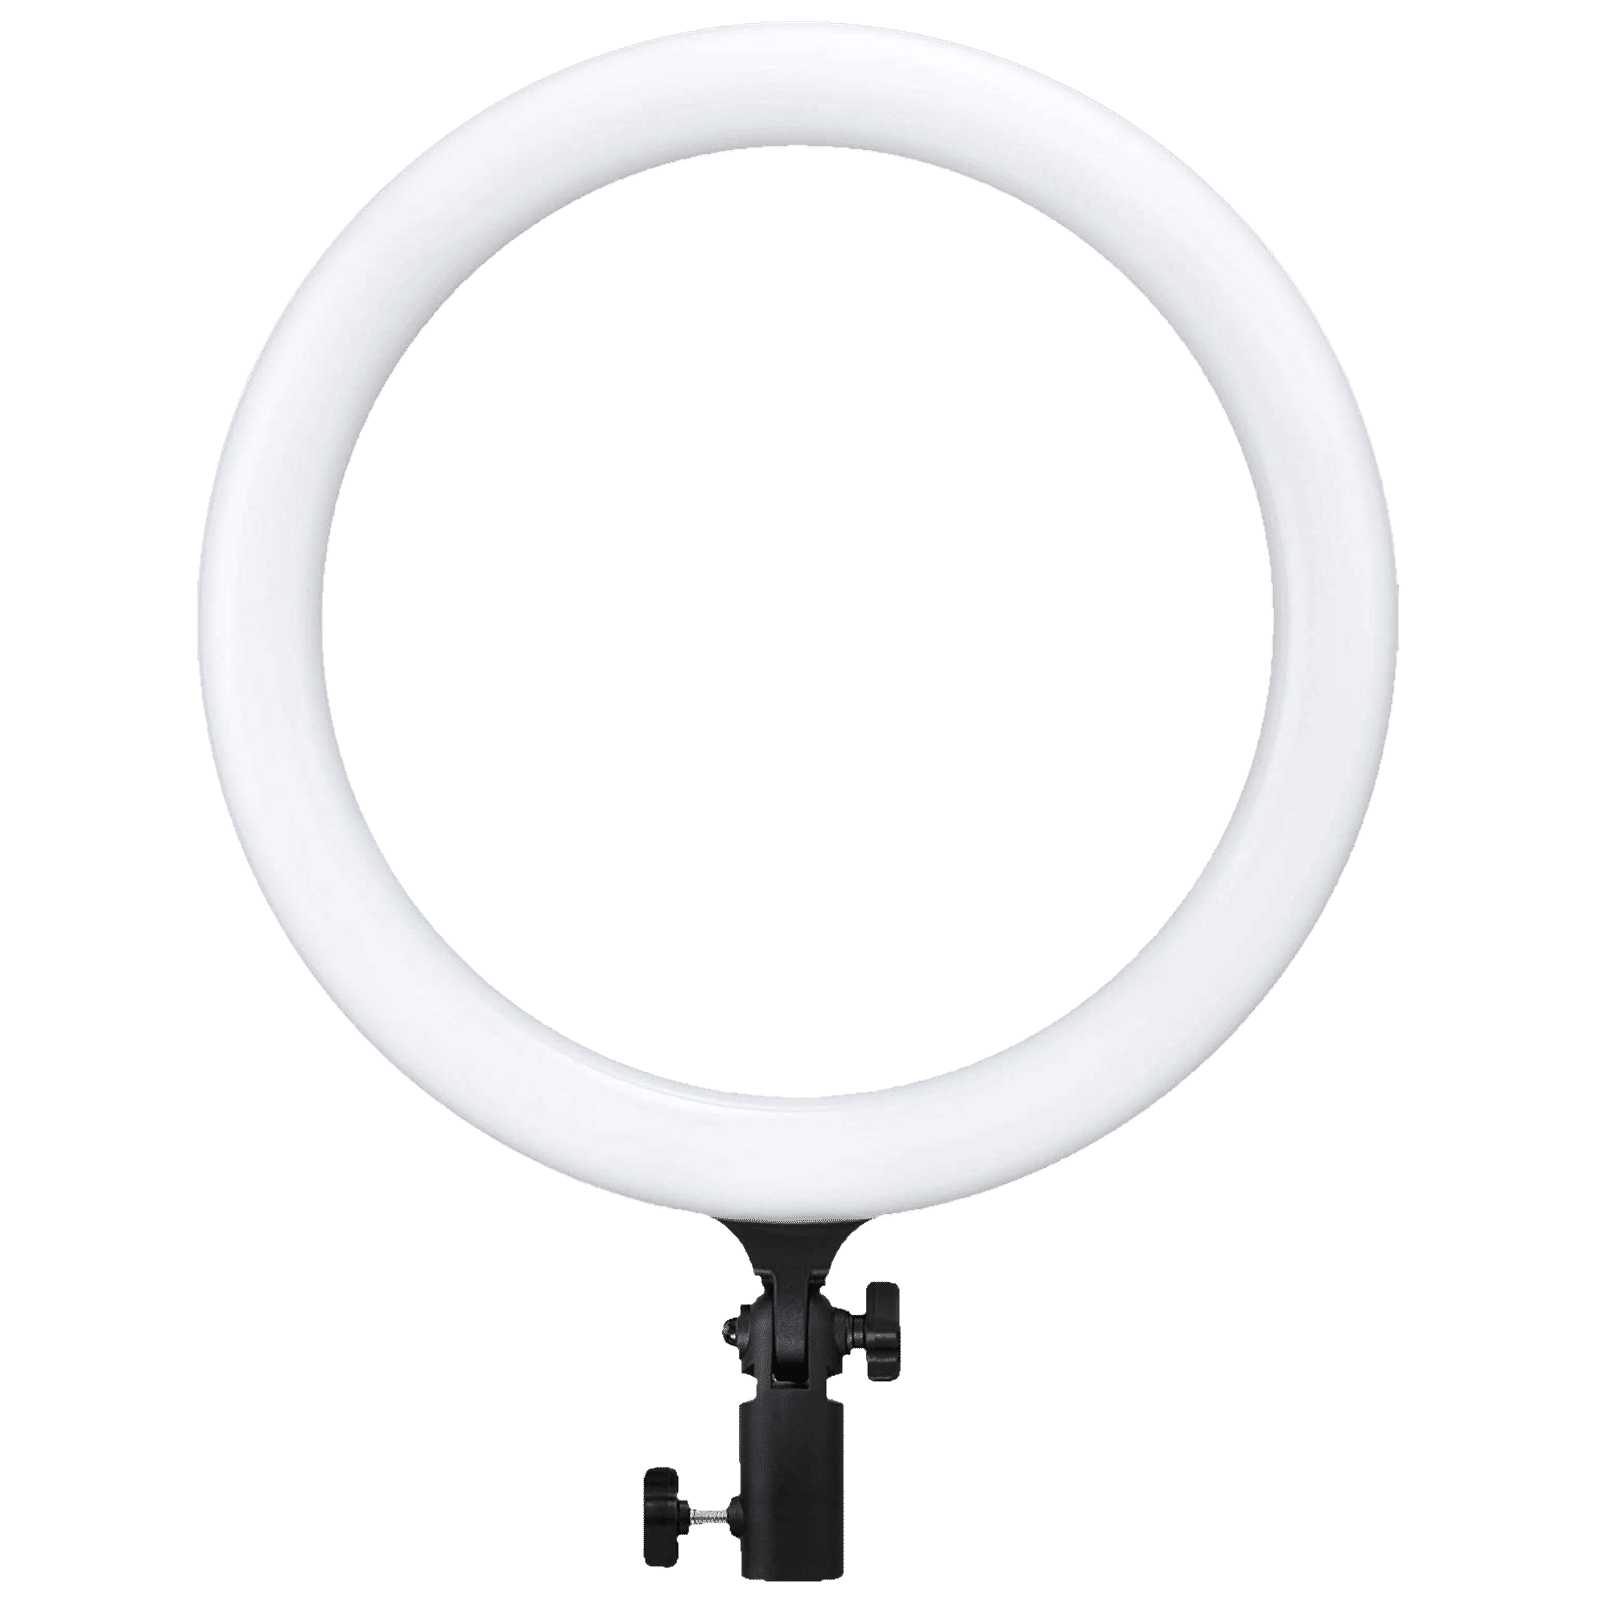 acube mart MT 15 Angel ring light 60mm blue single pc Projector Lens Price  in India - Buy acube mart MT 15 Angel ring light 60mm blue single pc  Projector Lens online